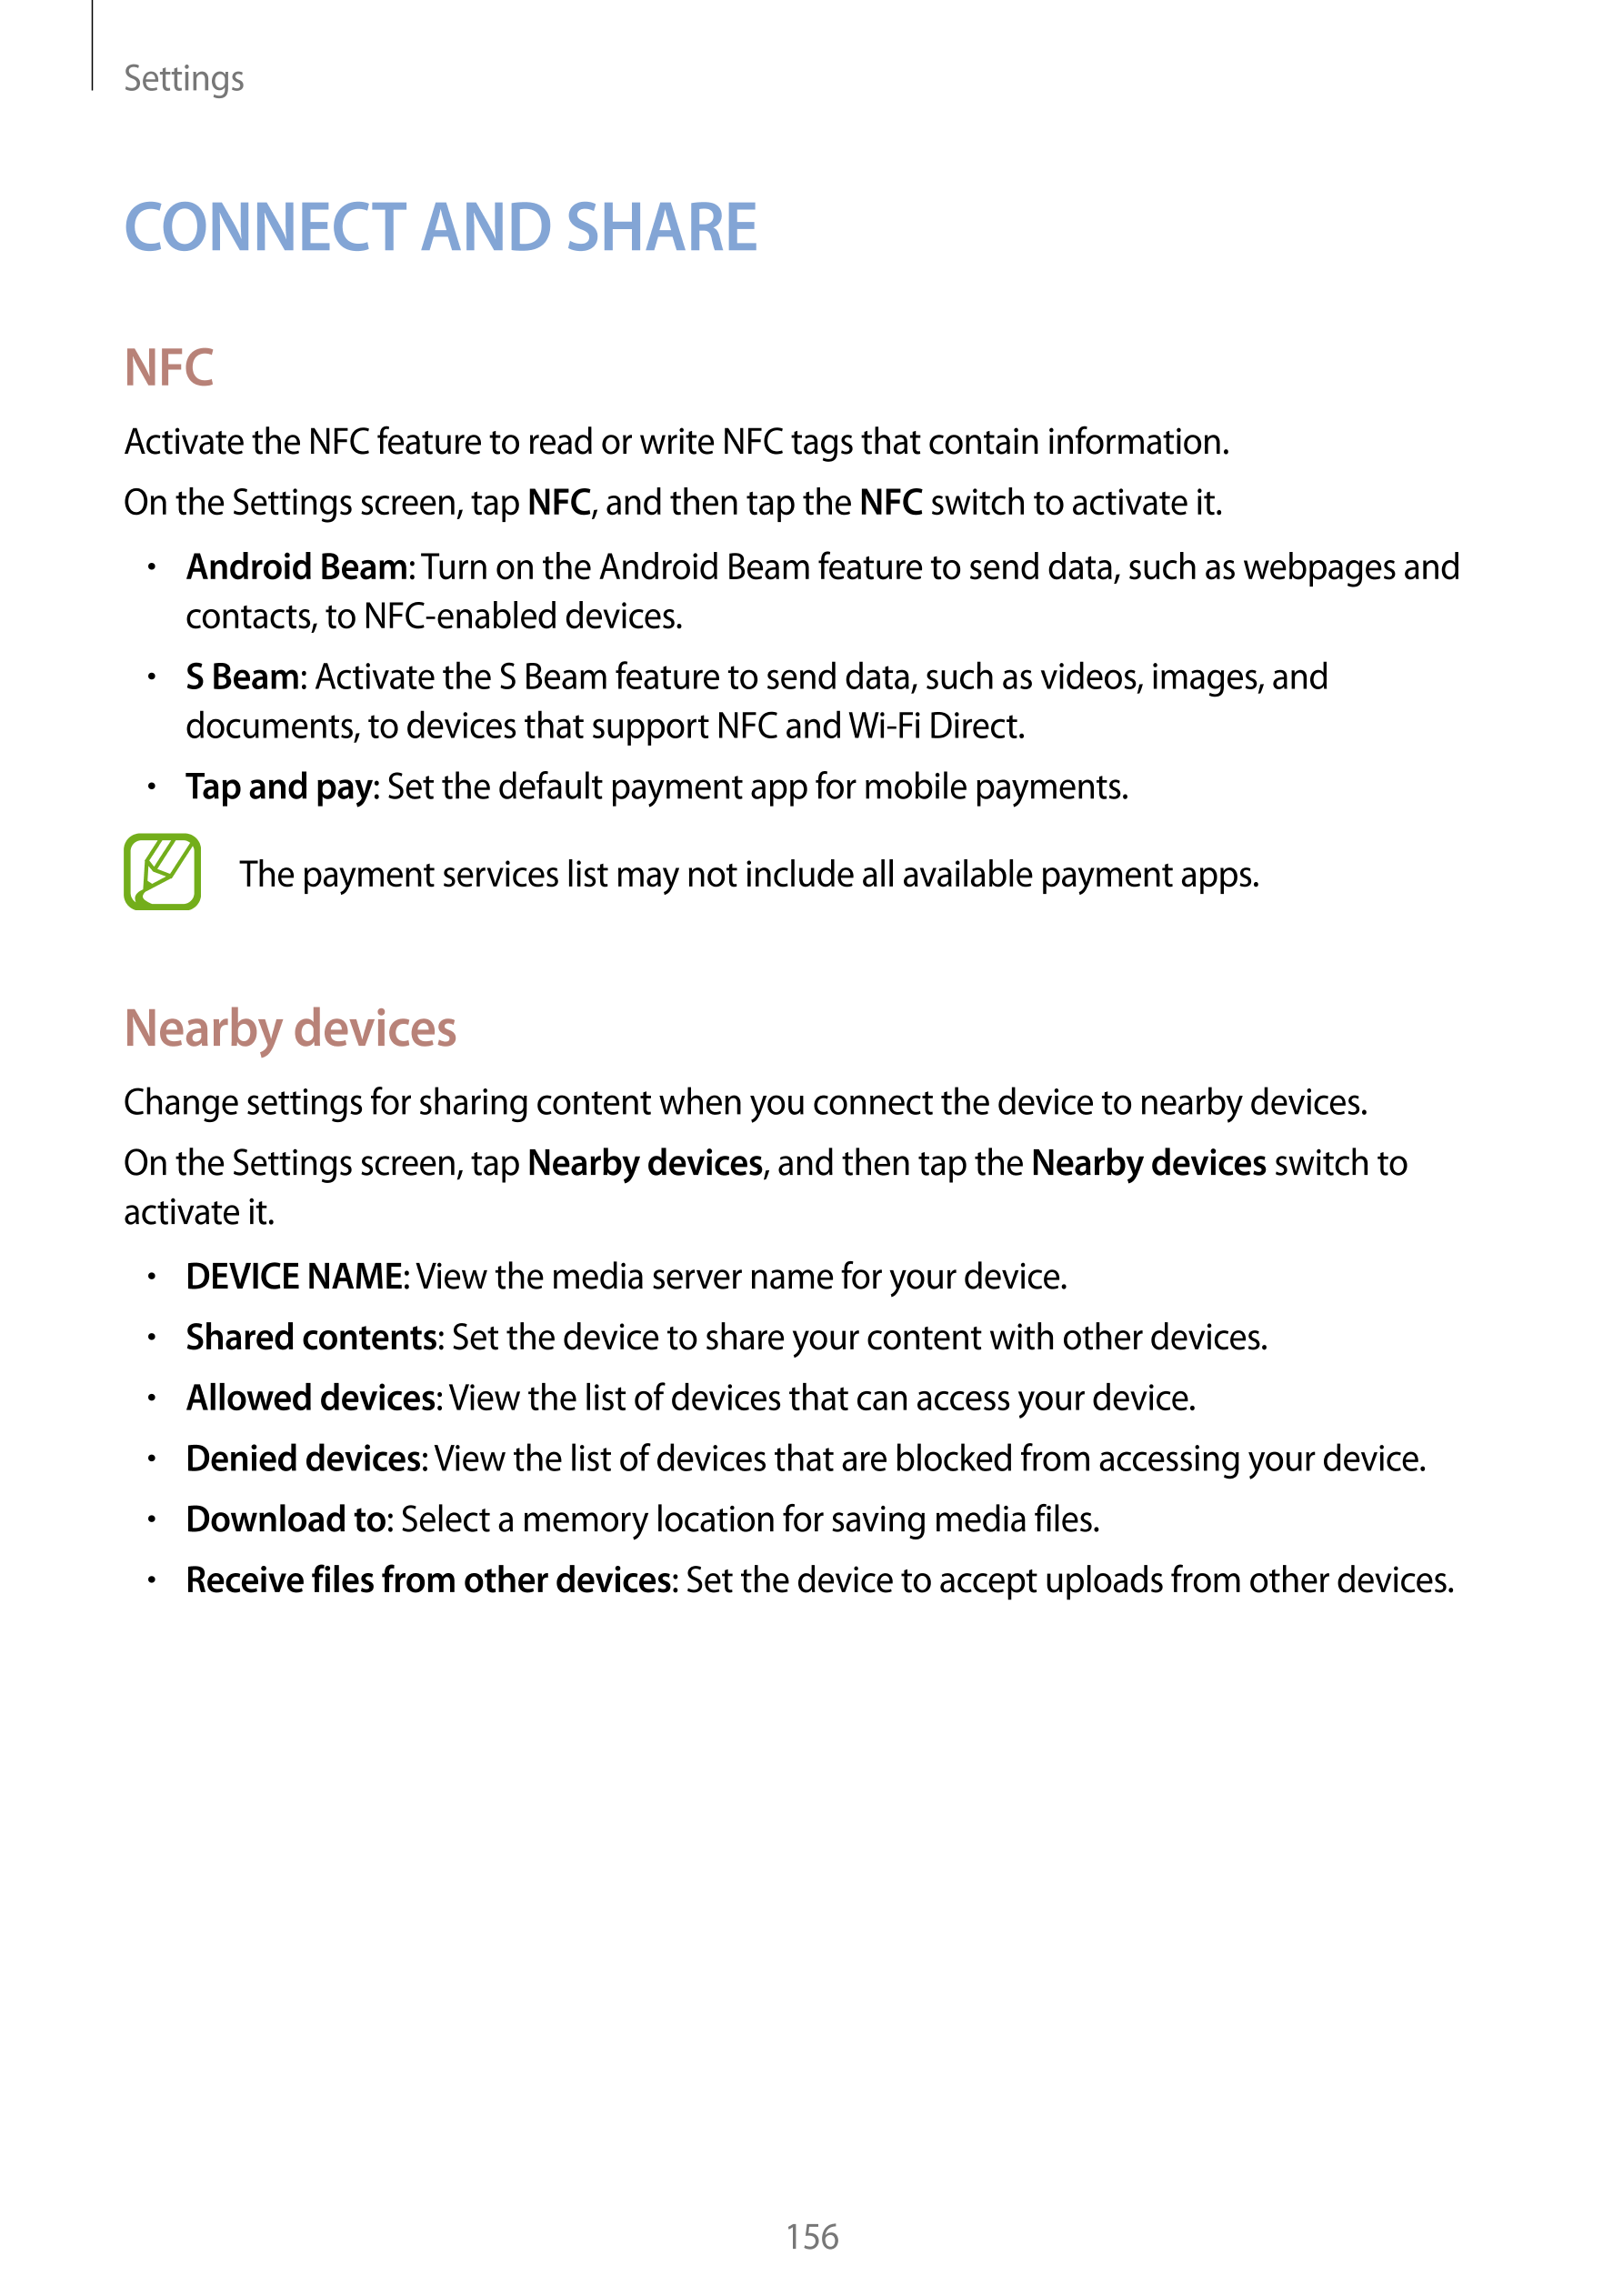 Settings
CONNECT AND SHARE
NFC
Activate the NFC feature to read or write NFC tags that contain information.
On the Settings scre